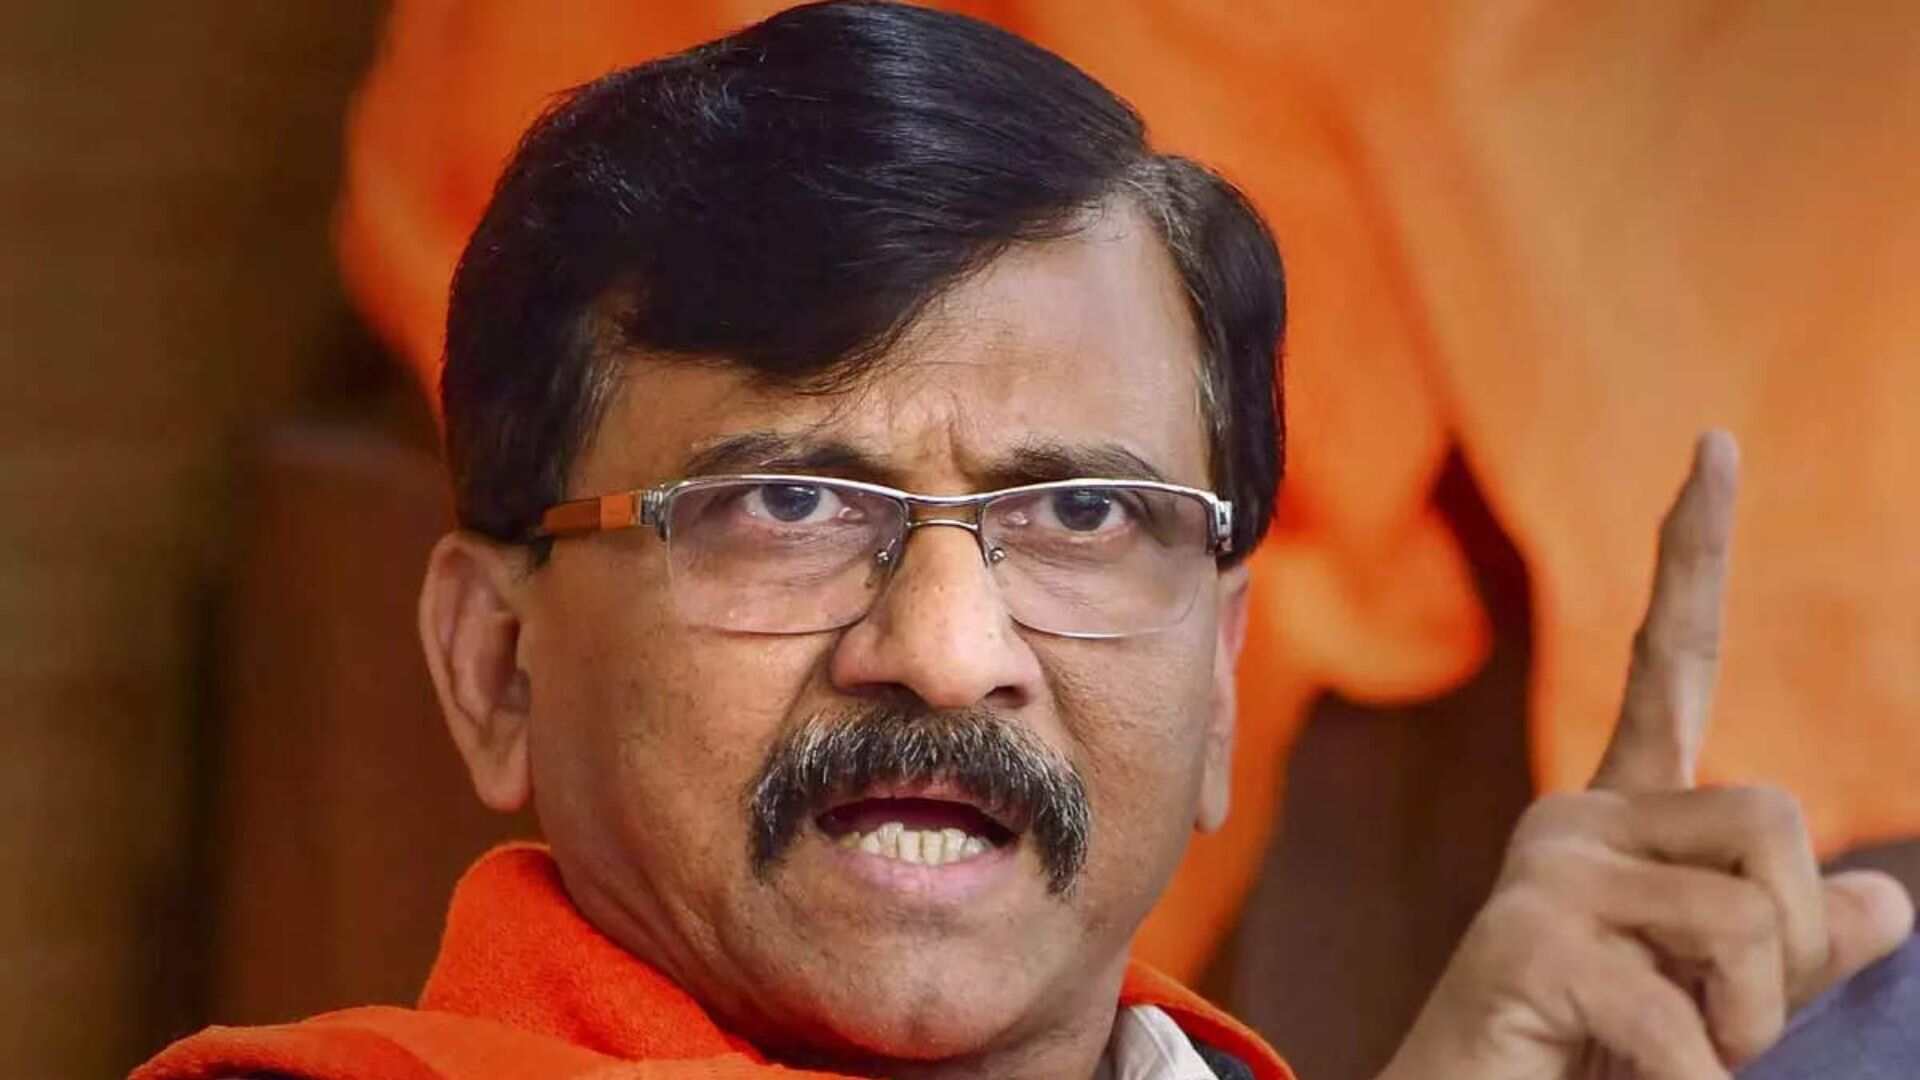 “If Rahul Gandhi Accepts PM Post, We Wouldn’t Object”: Shiv Sena UBT’s Sanjay Raut On LS Poll Results